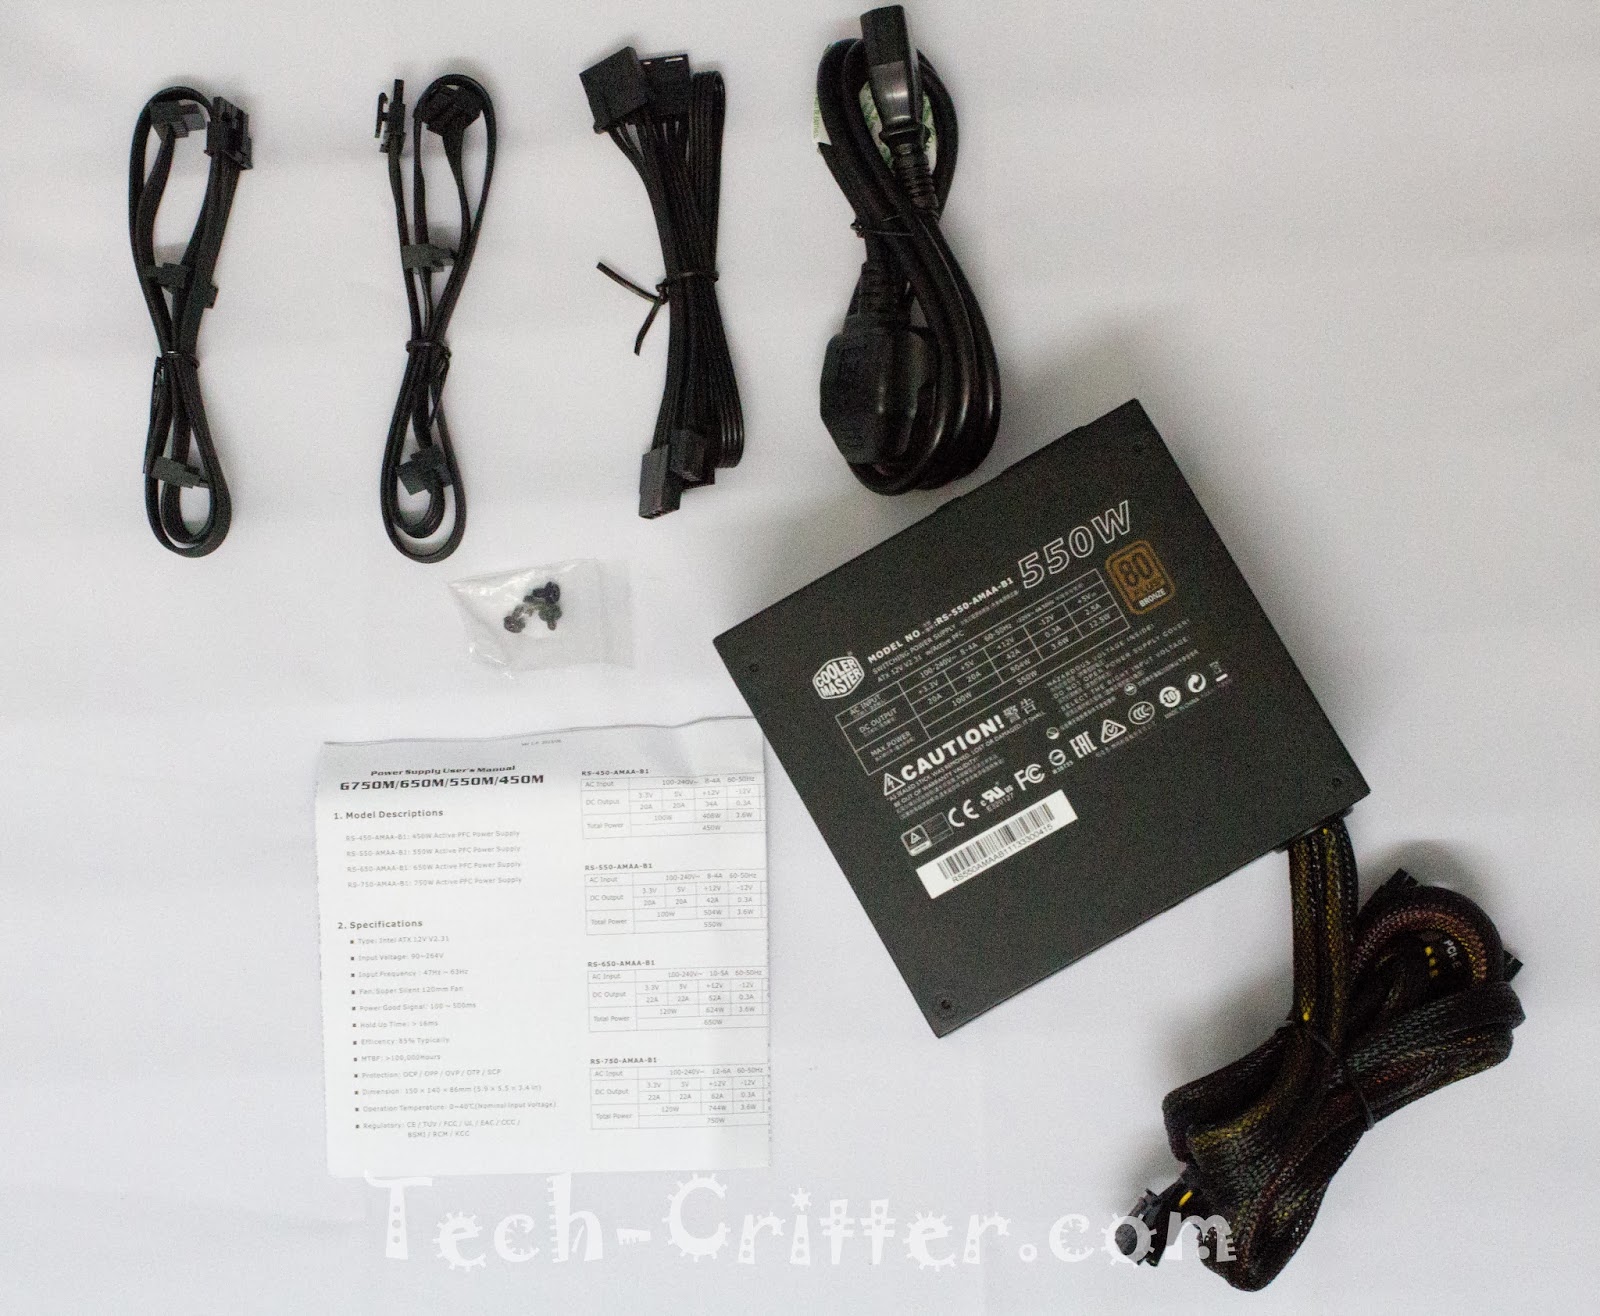 Cooler Master G550M Power Supply Unit Unboxing and Overview 28